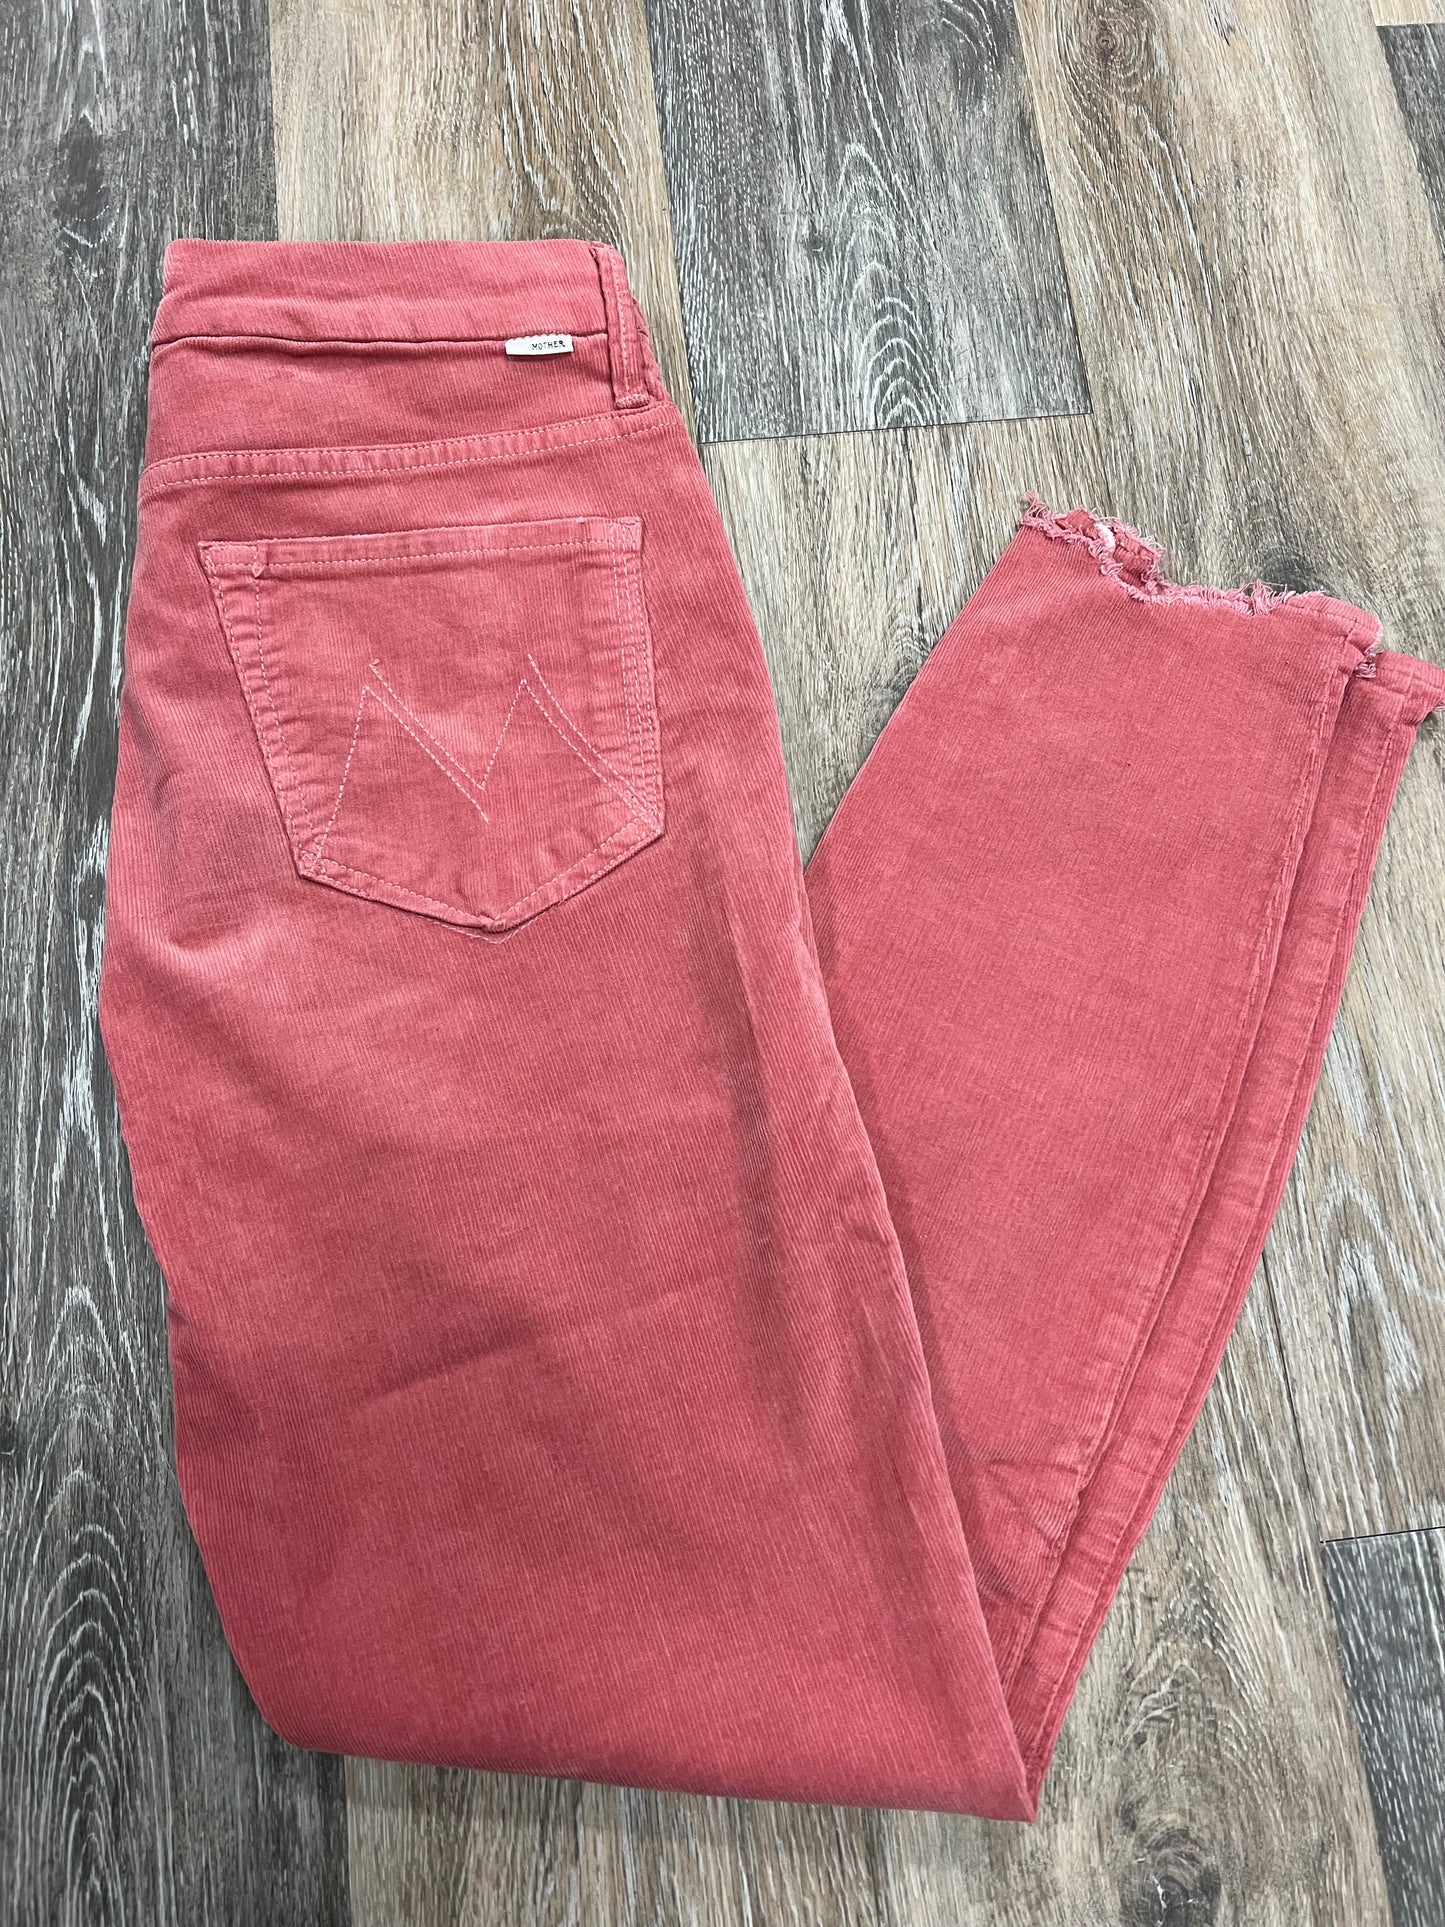 Pants Designer By Mother Jeans  Size: 4/27